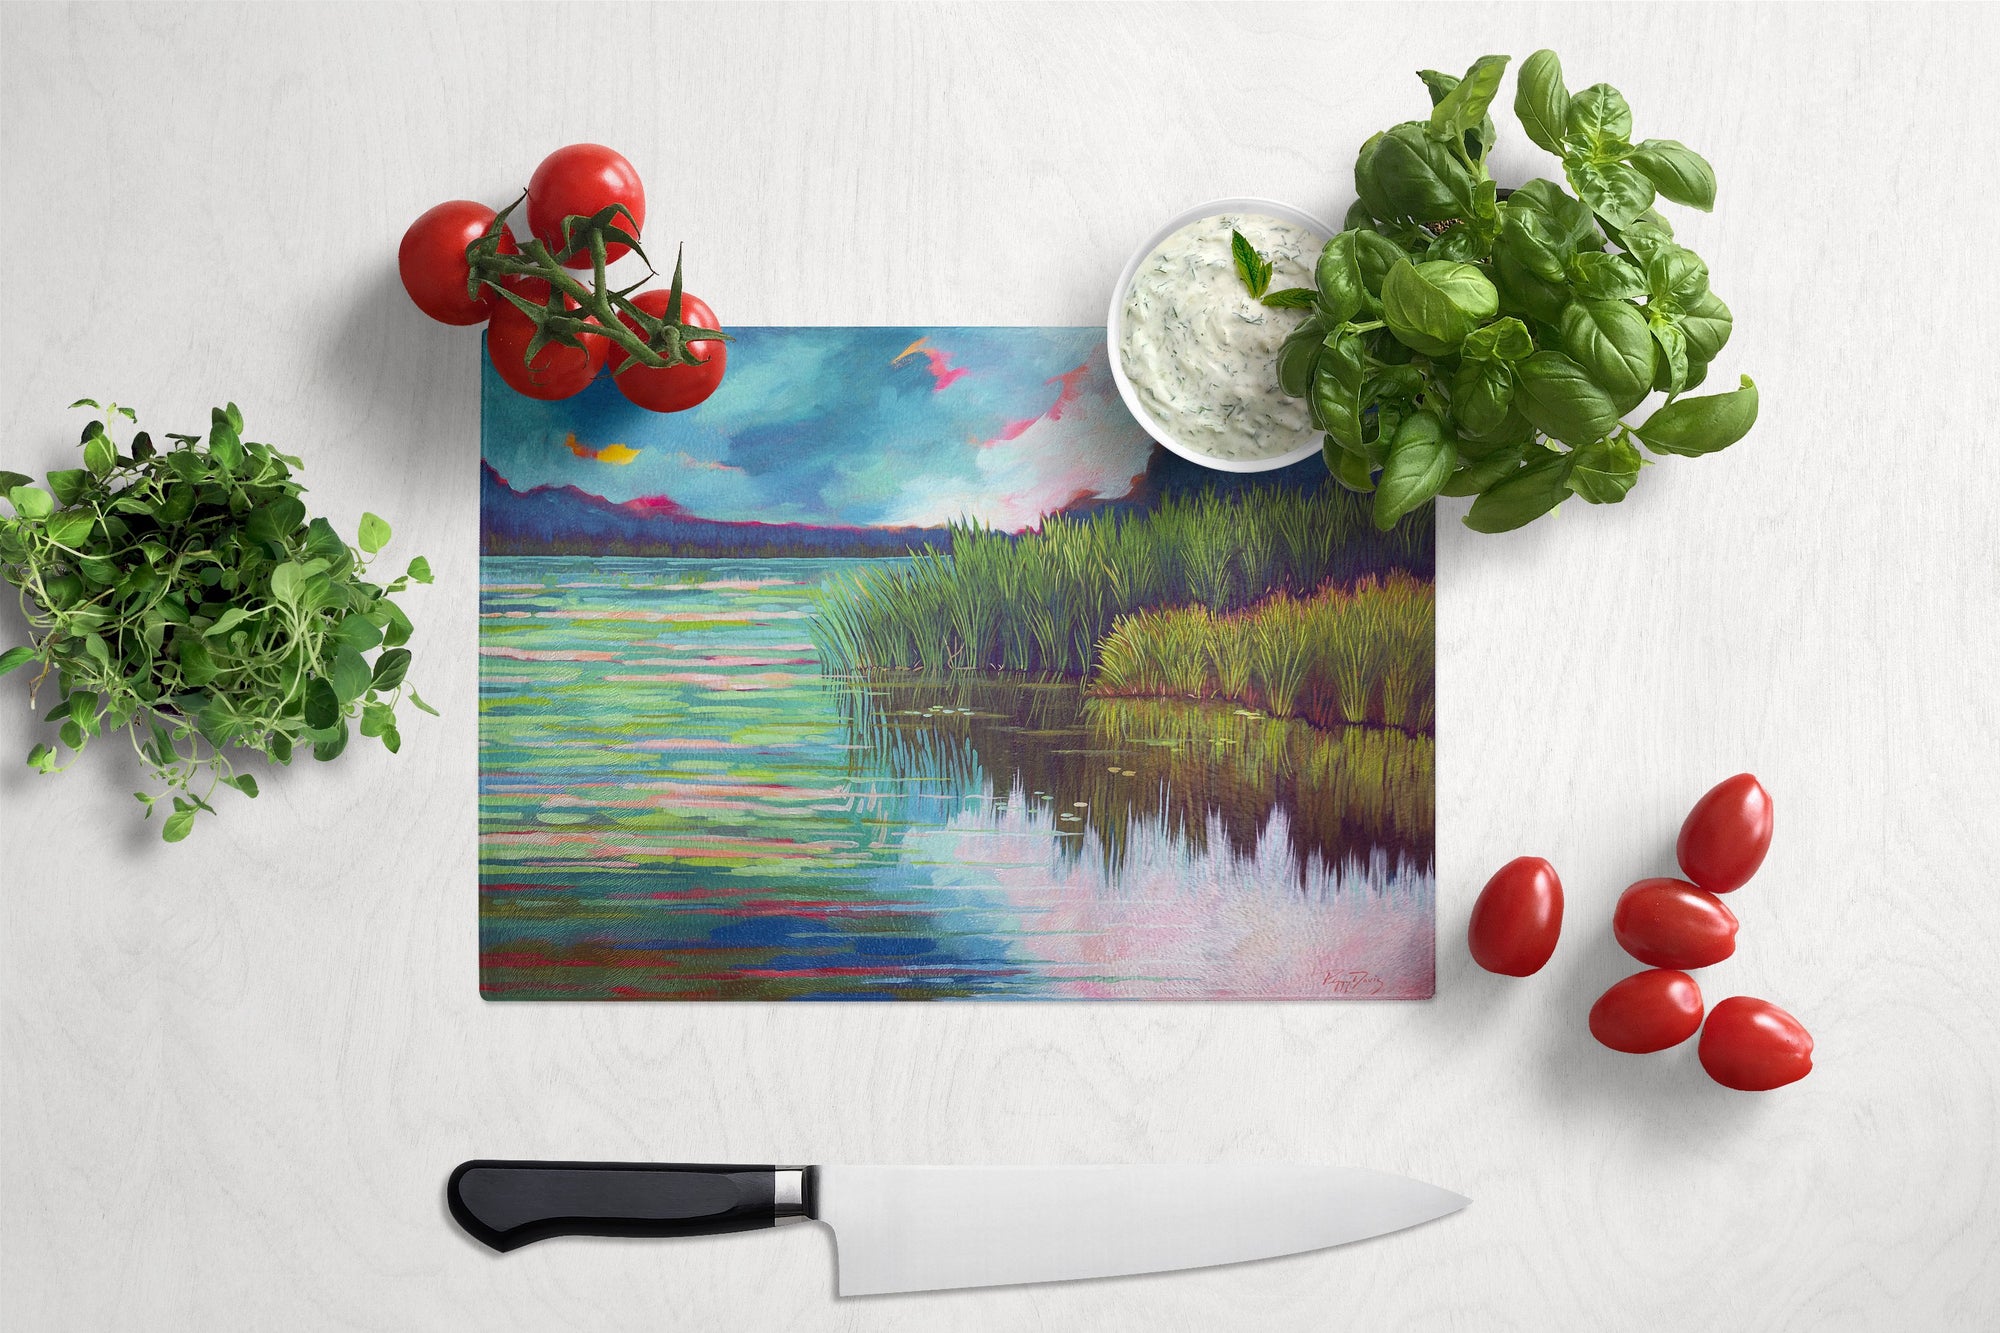 Moved upon the Water Glass Cutting Board Large PPD3018LCB by Caroline's Treasures